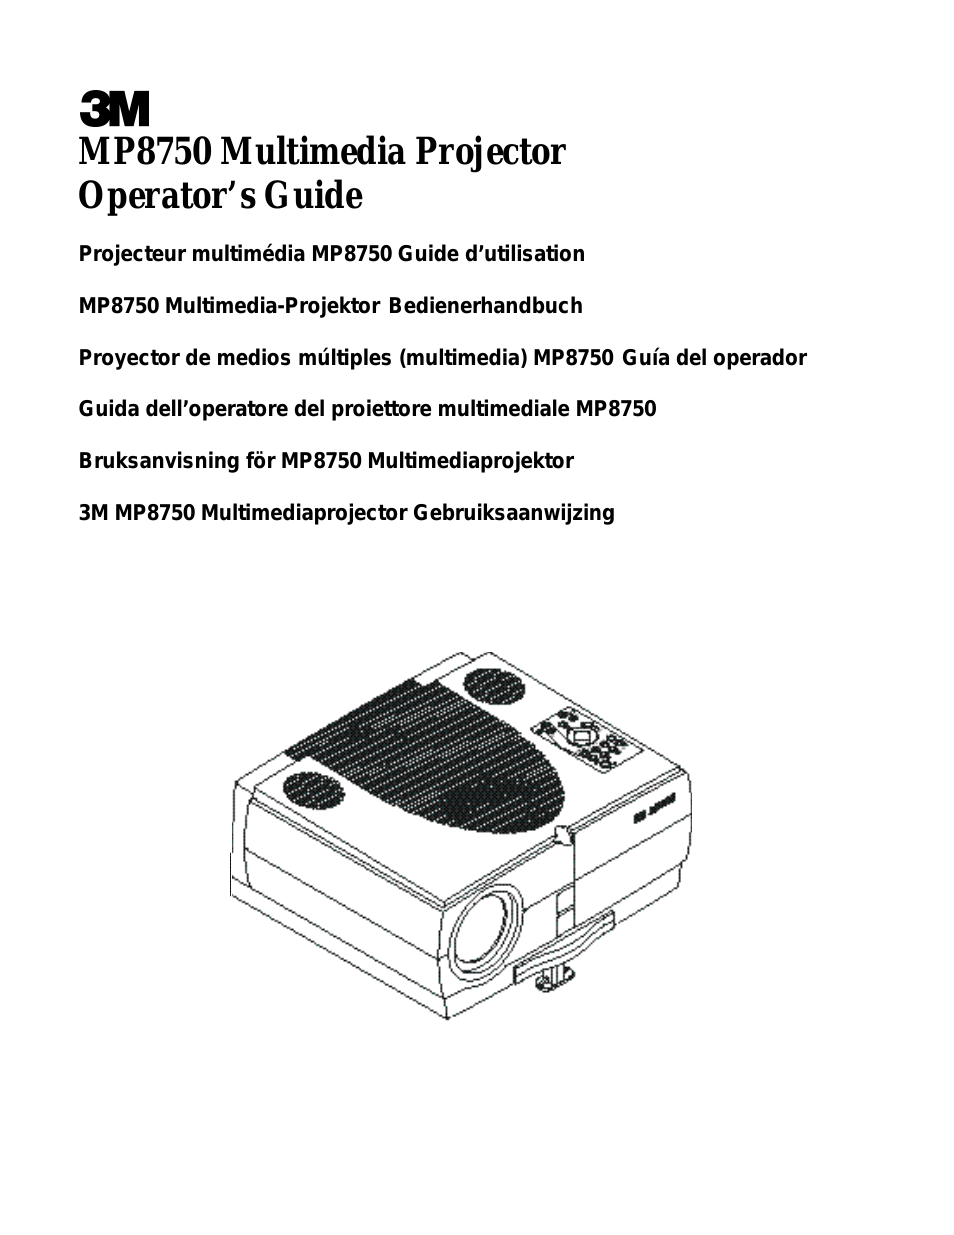 MP8750 (Page 1)